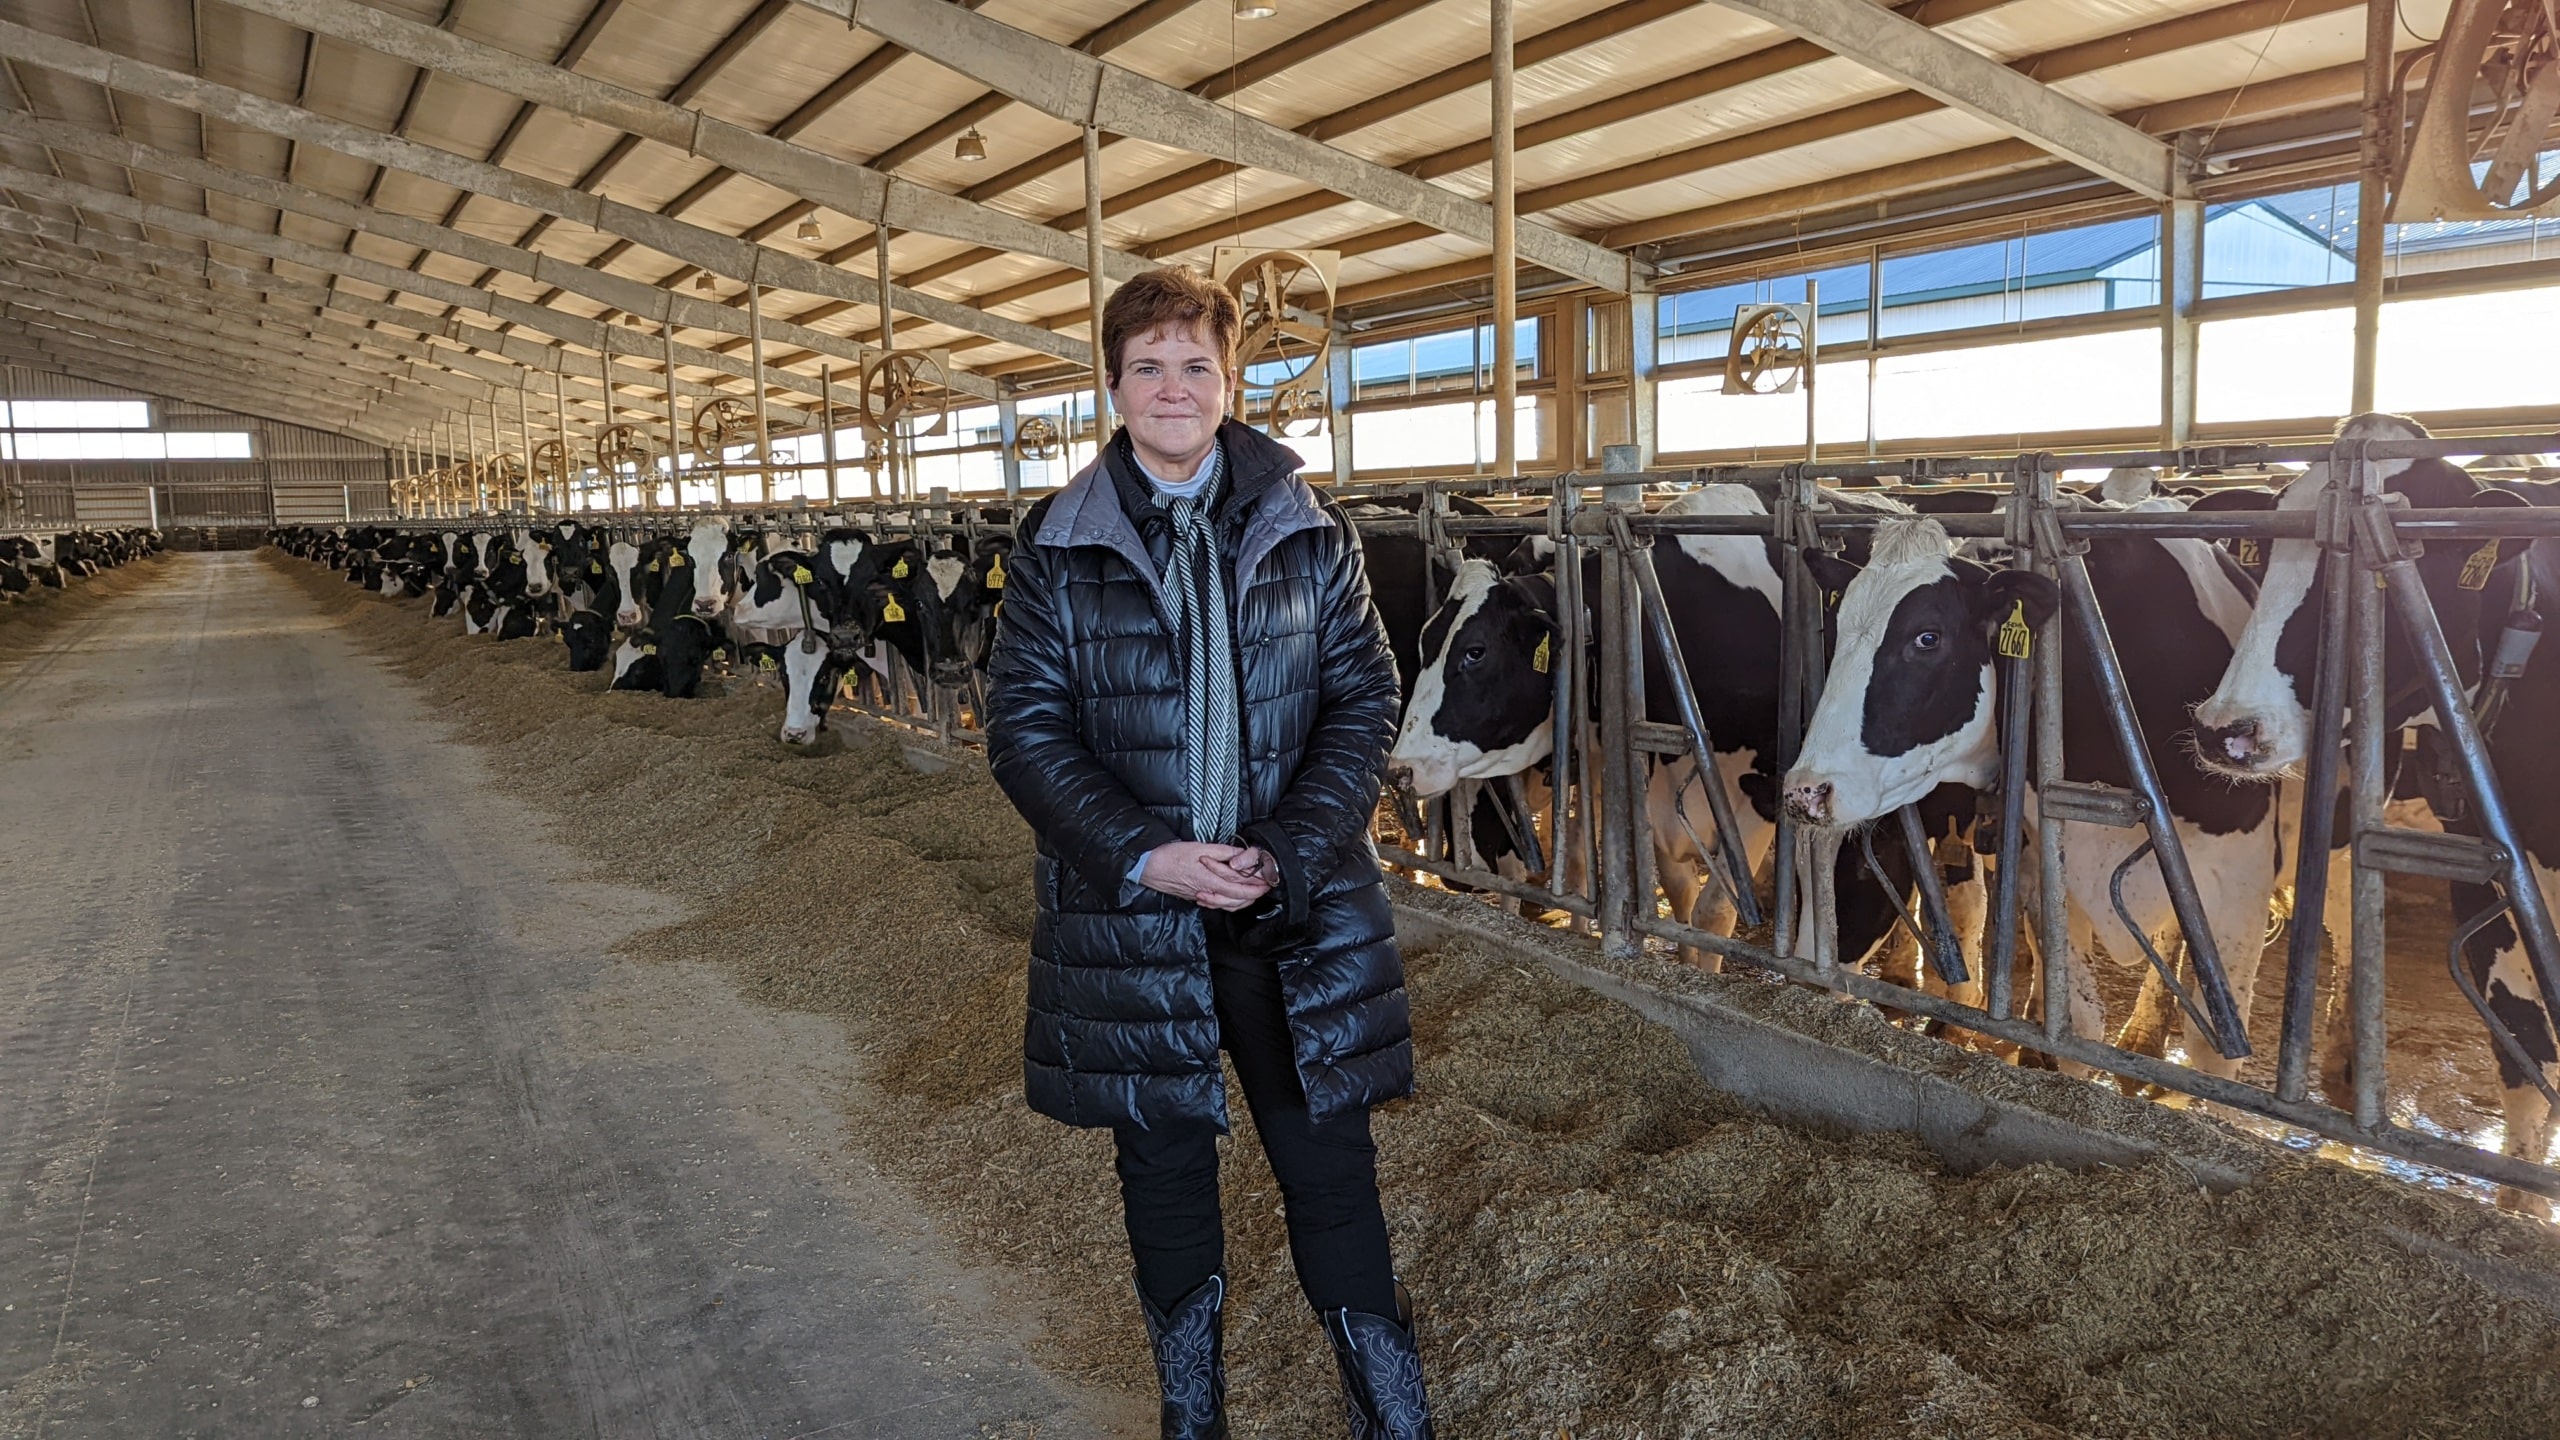 Krysta Harden stands in foreground in large metal building with background of black and white cows sticking heads out of metal stalls with silage on ground for them to eat